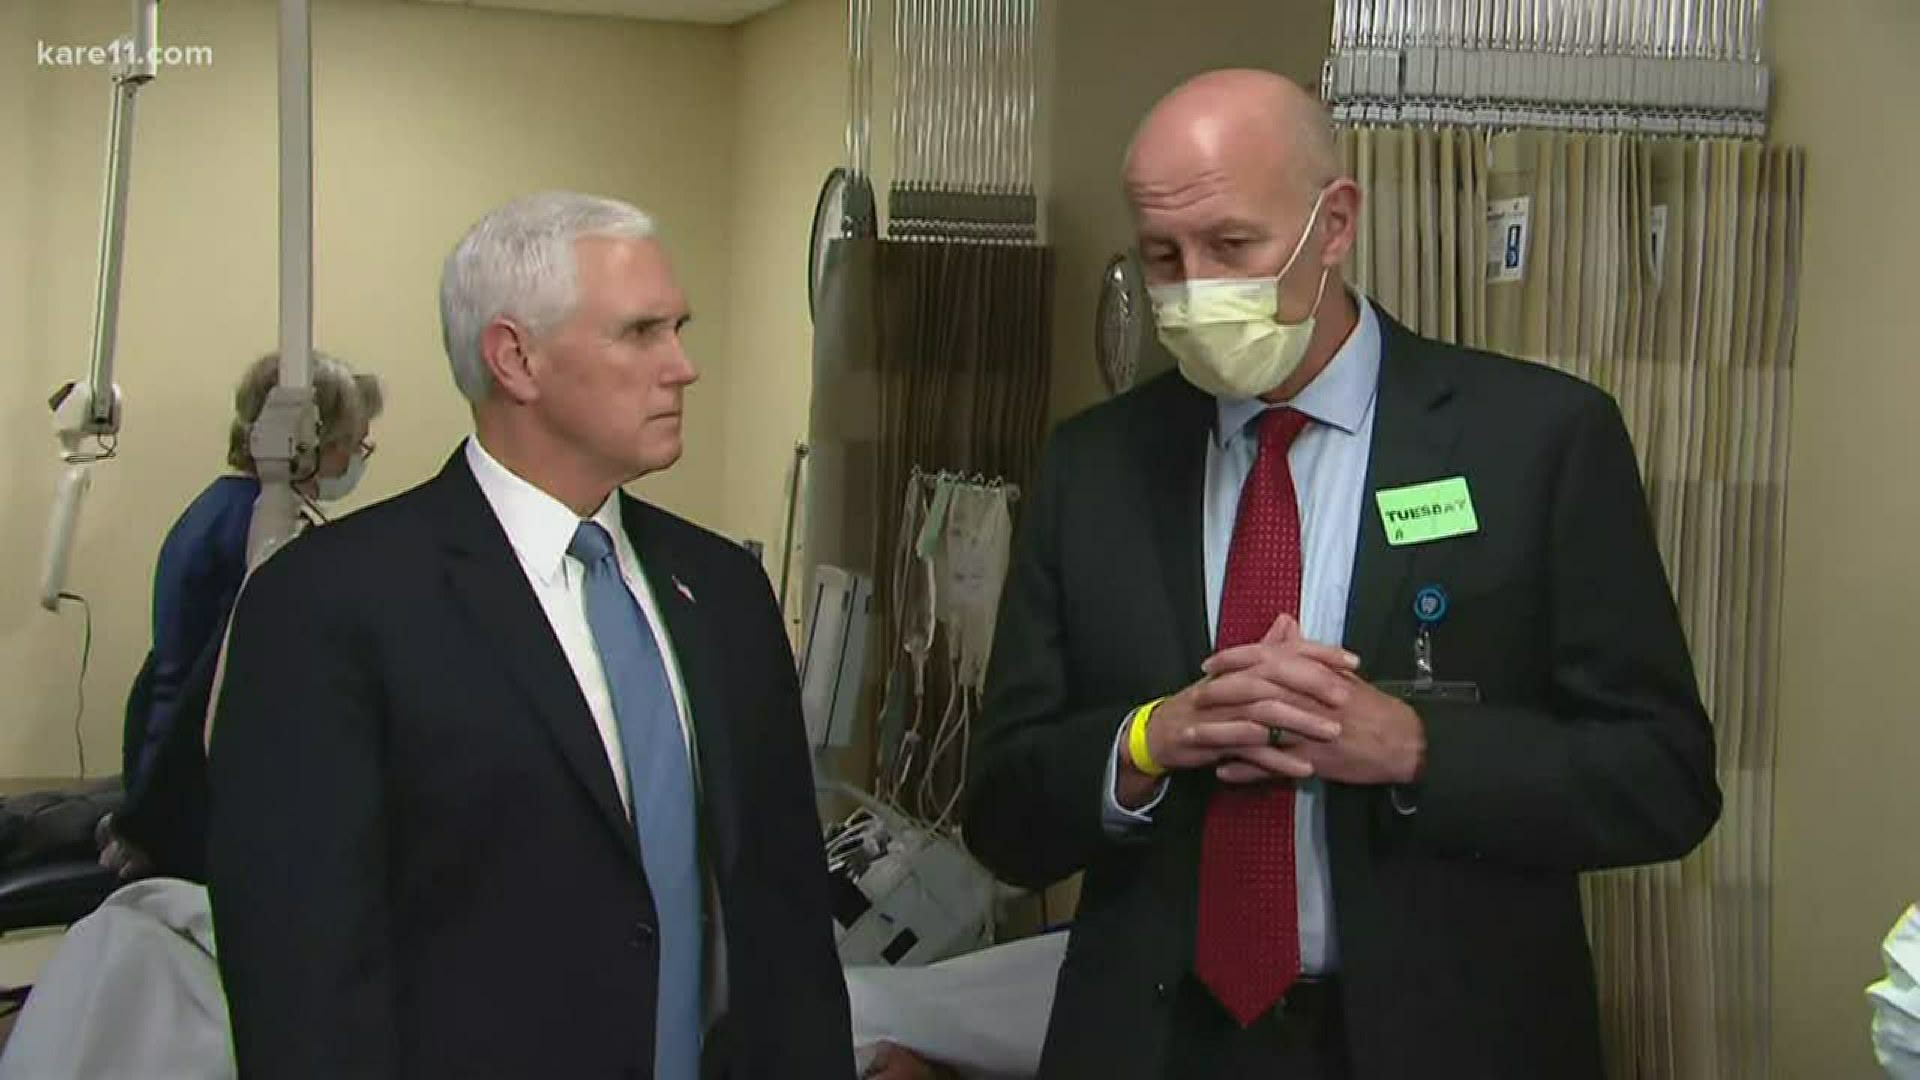 The vice president's office did not immediately respond to a request for comment on why Pence chose not to wear a mask.